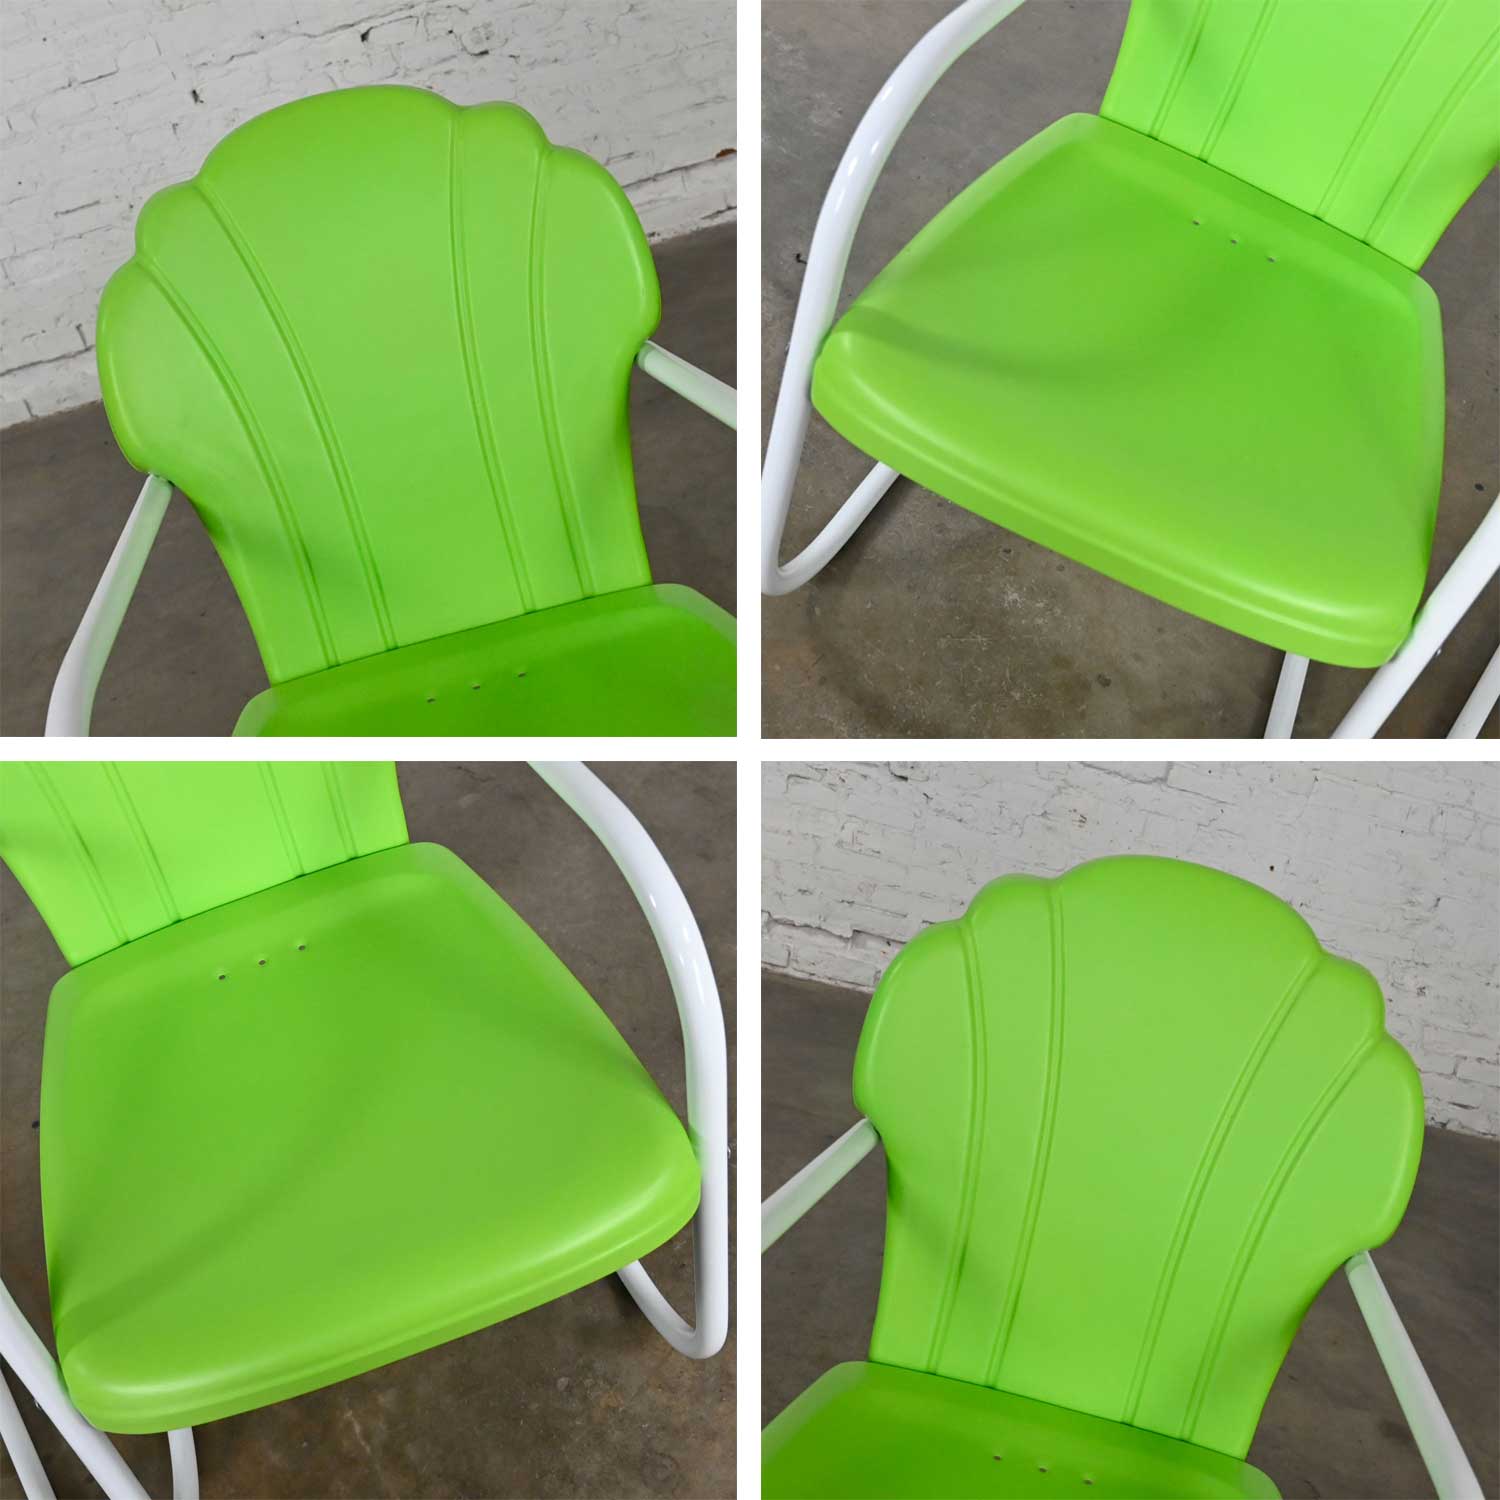 Vintage Mid Century Modern Green & White Metal Outdoor Cantilever Springer Chairs